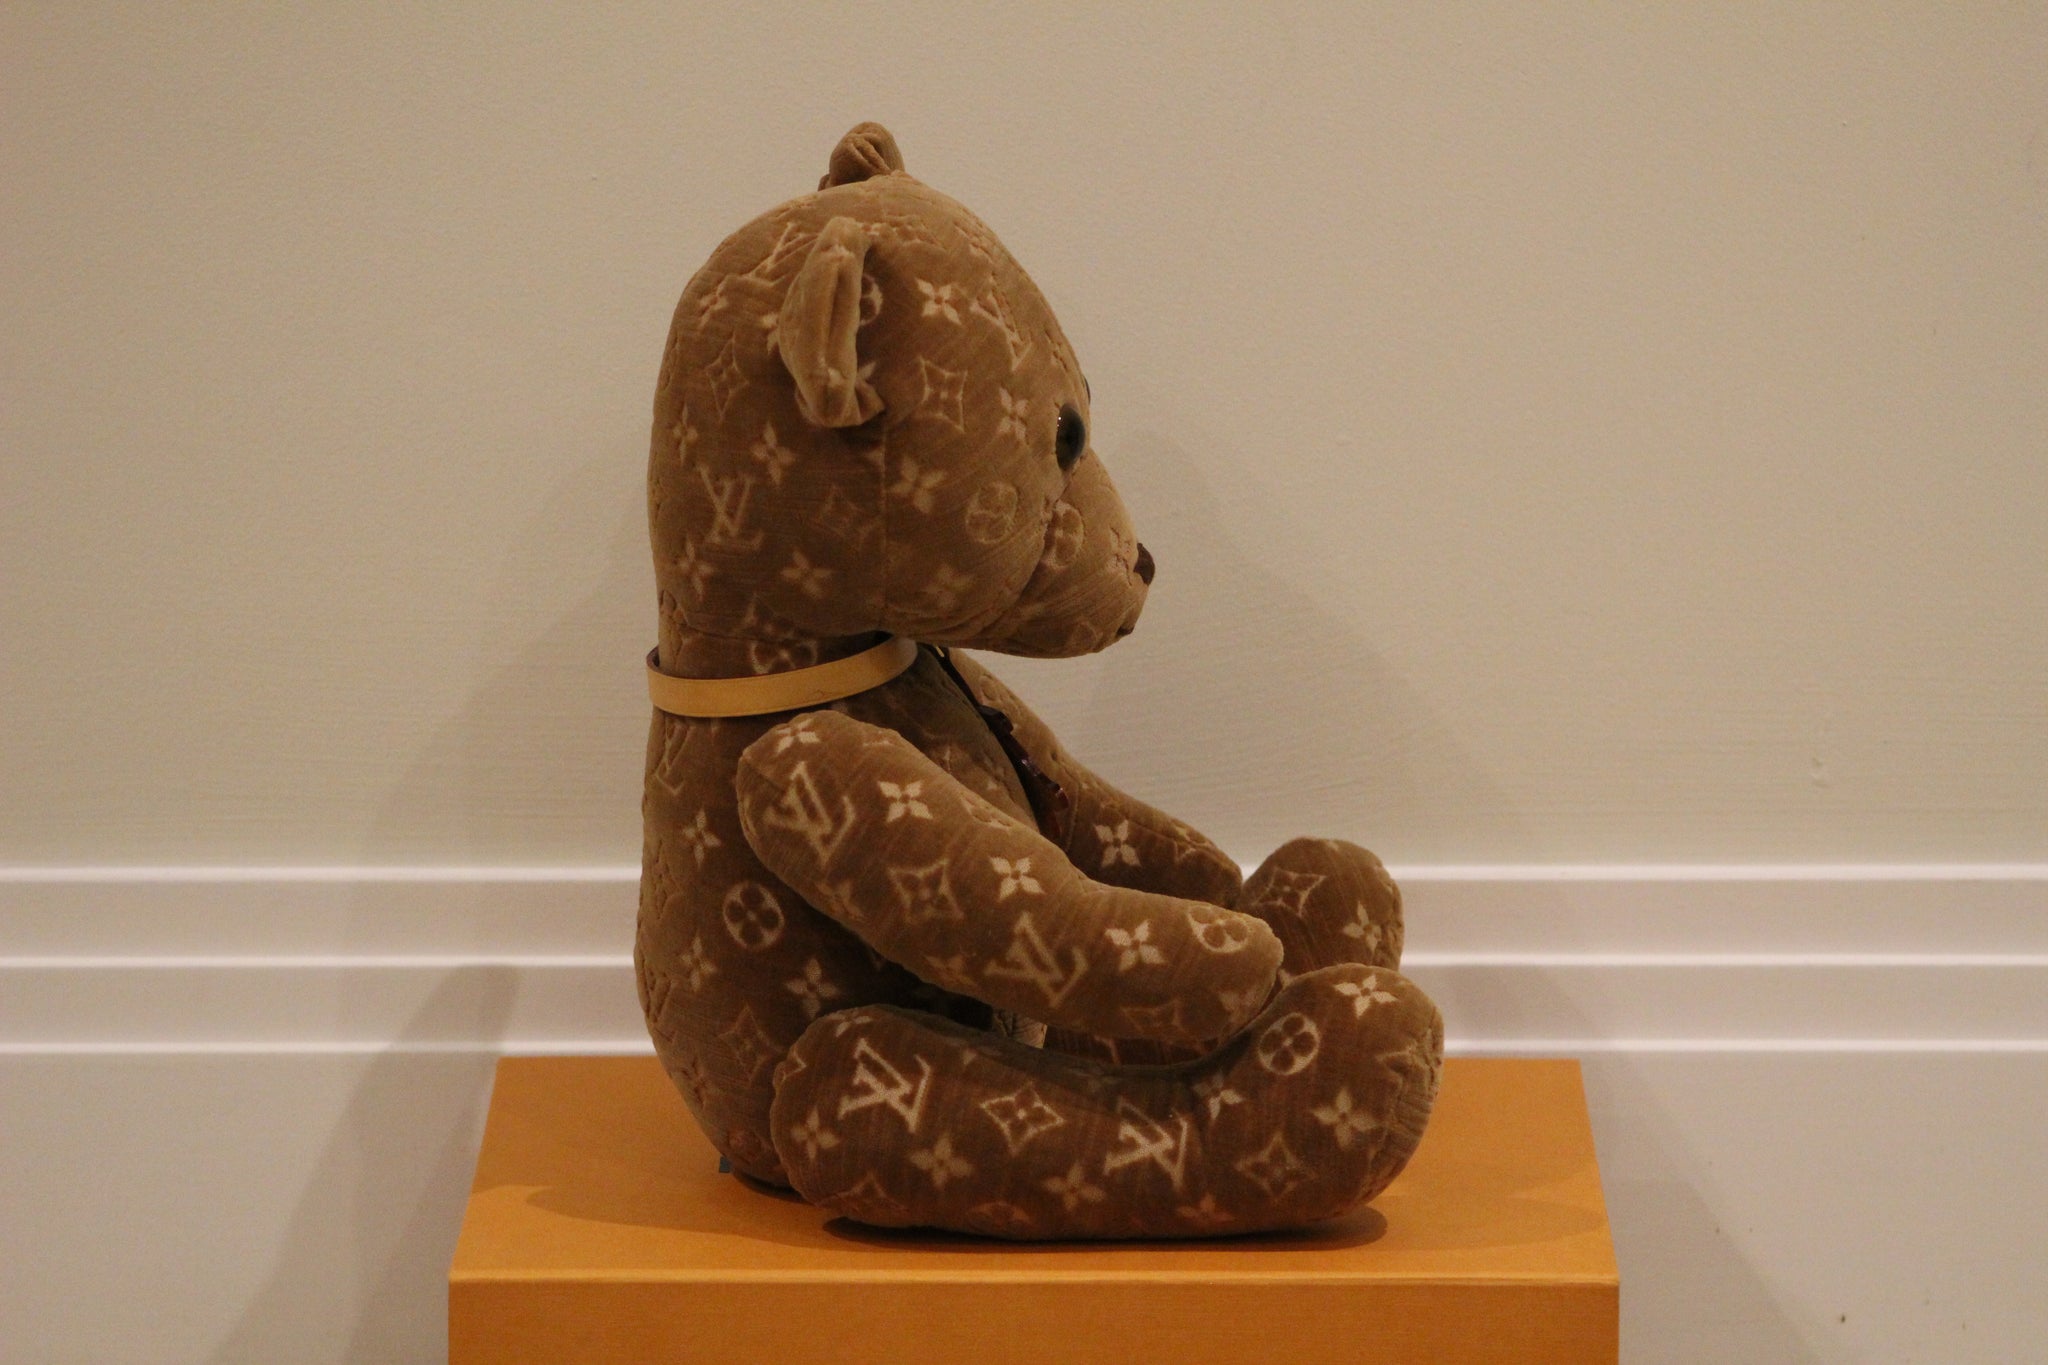 A limited edition Doudou Teddy Bear by Louis Vuitton, France